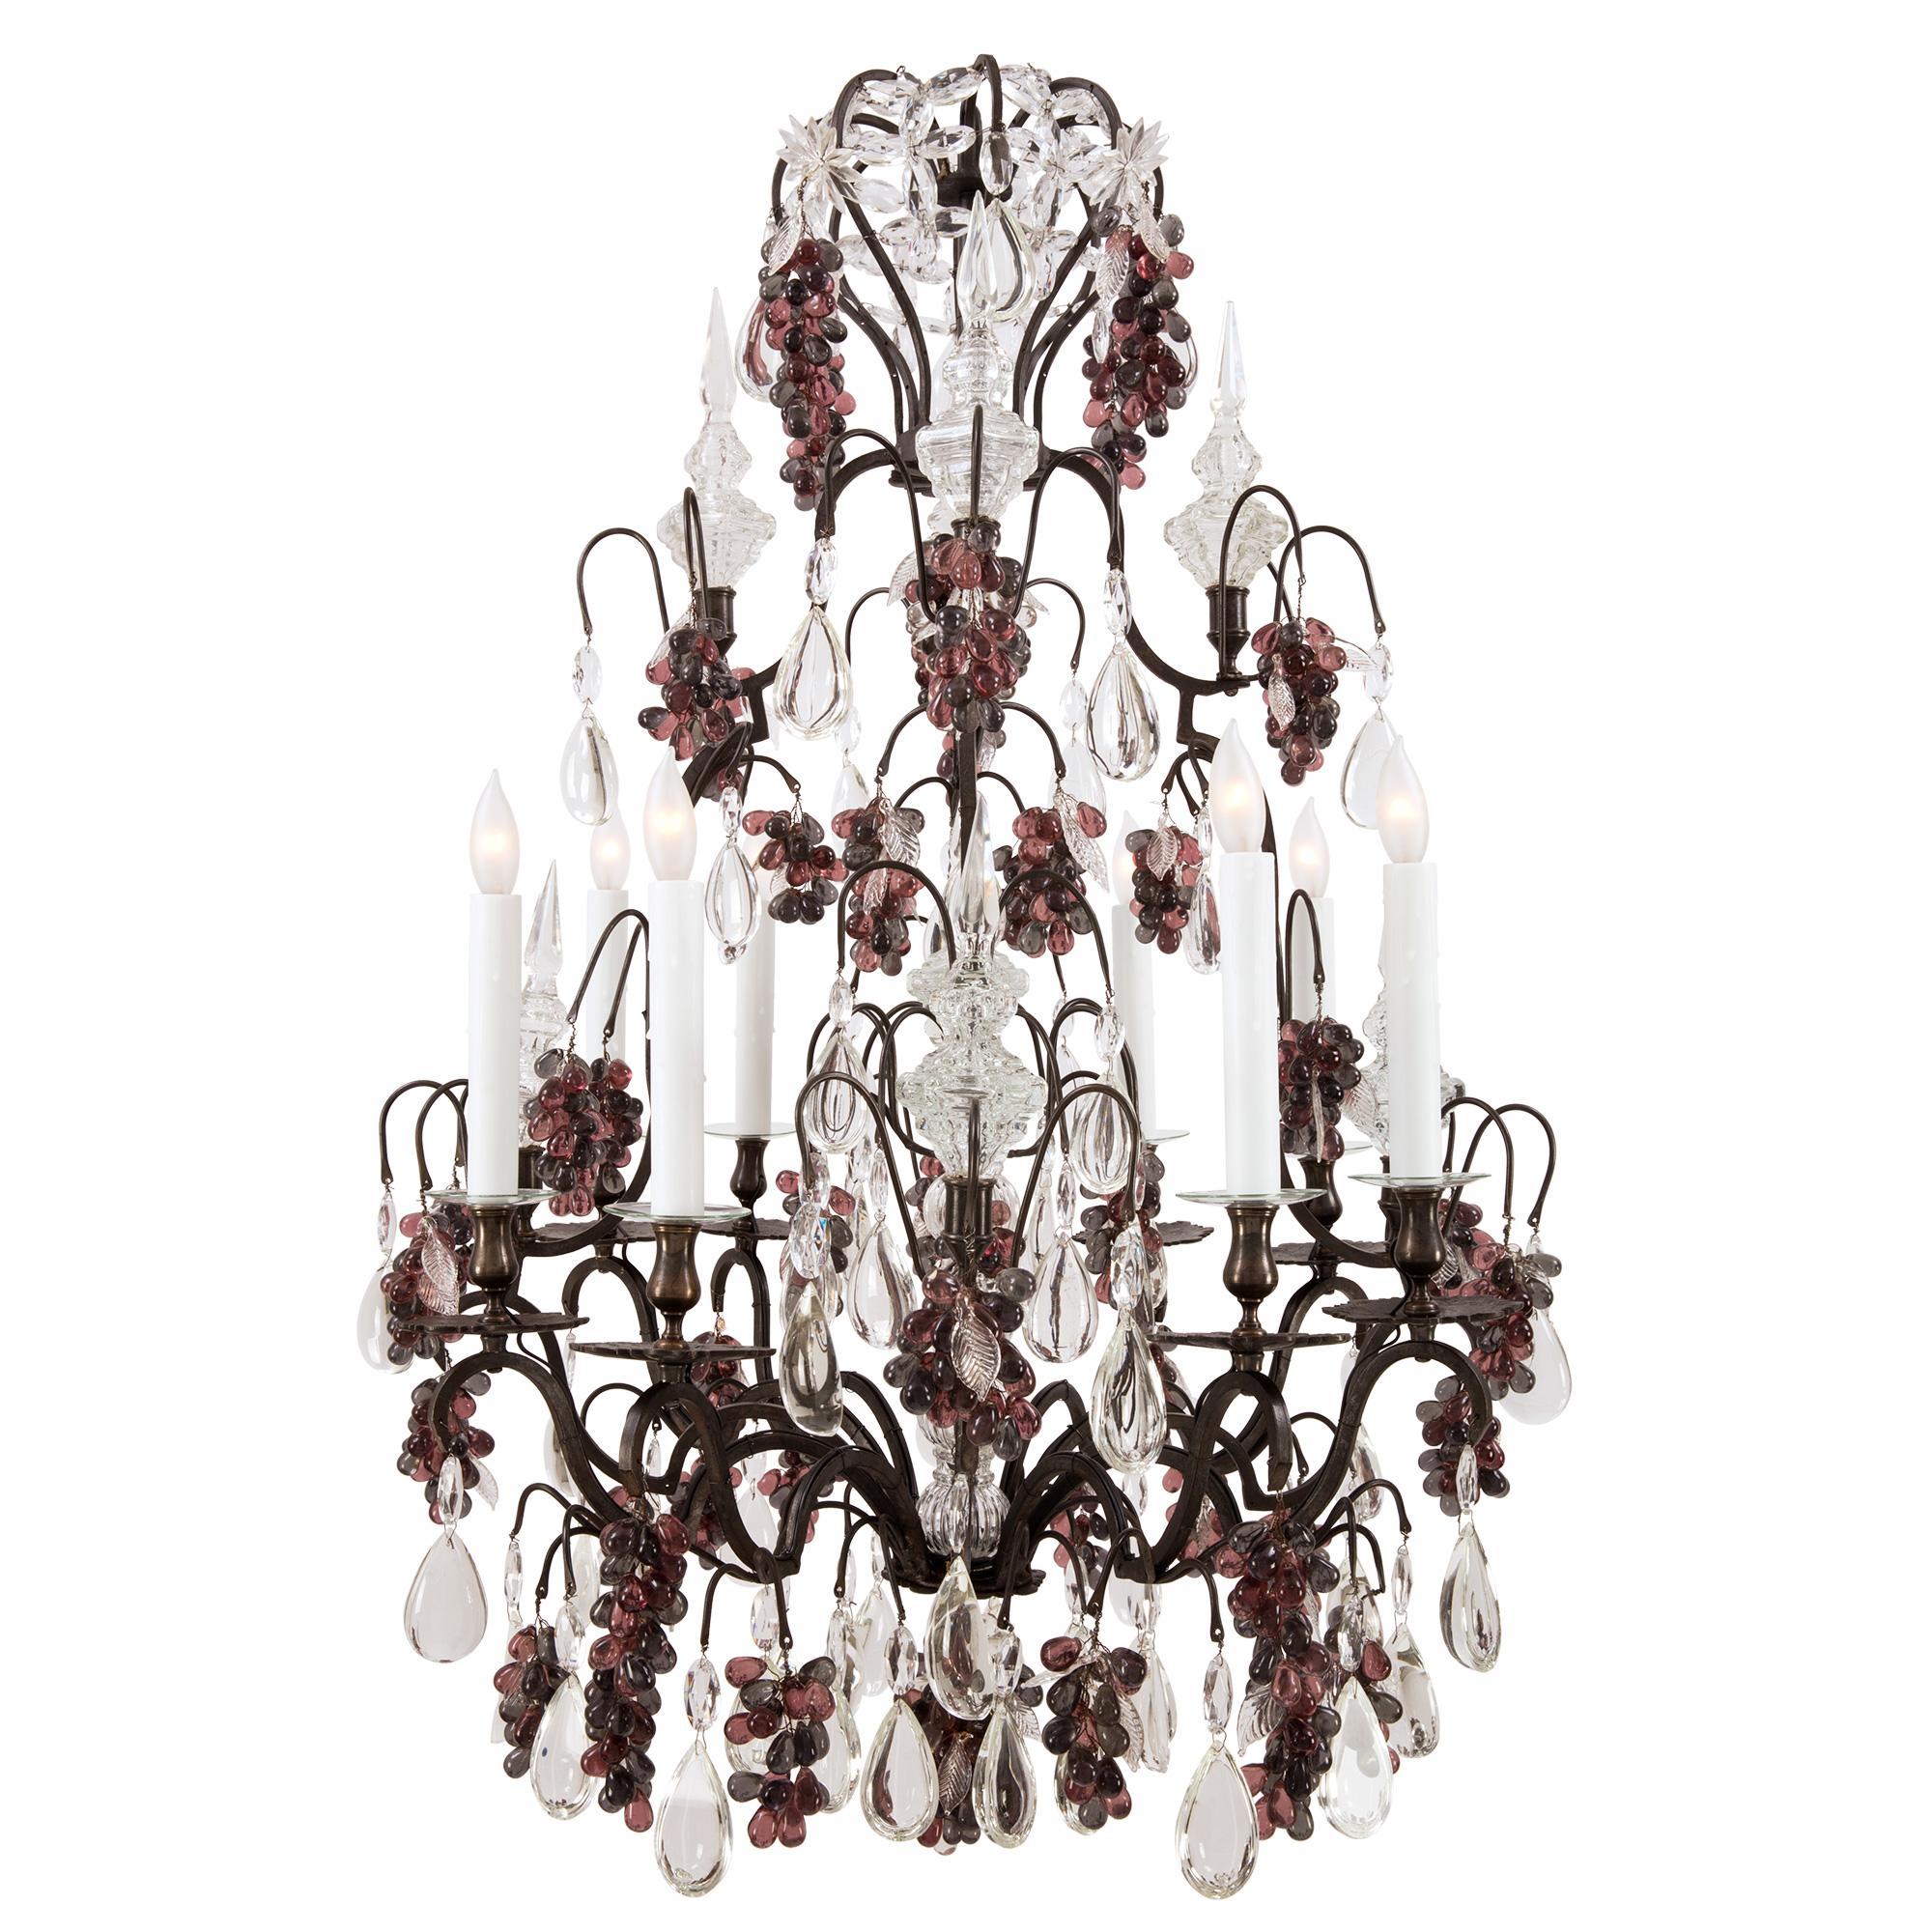 A beautiful French 19th century Louis XV st. wrought iron, crystal and colored glass eight light chandelier. The chandelier is centered by striking and wonderfully executed grape clusters of lovely colorful glass beads and exceptional etched crystal